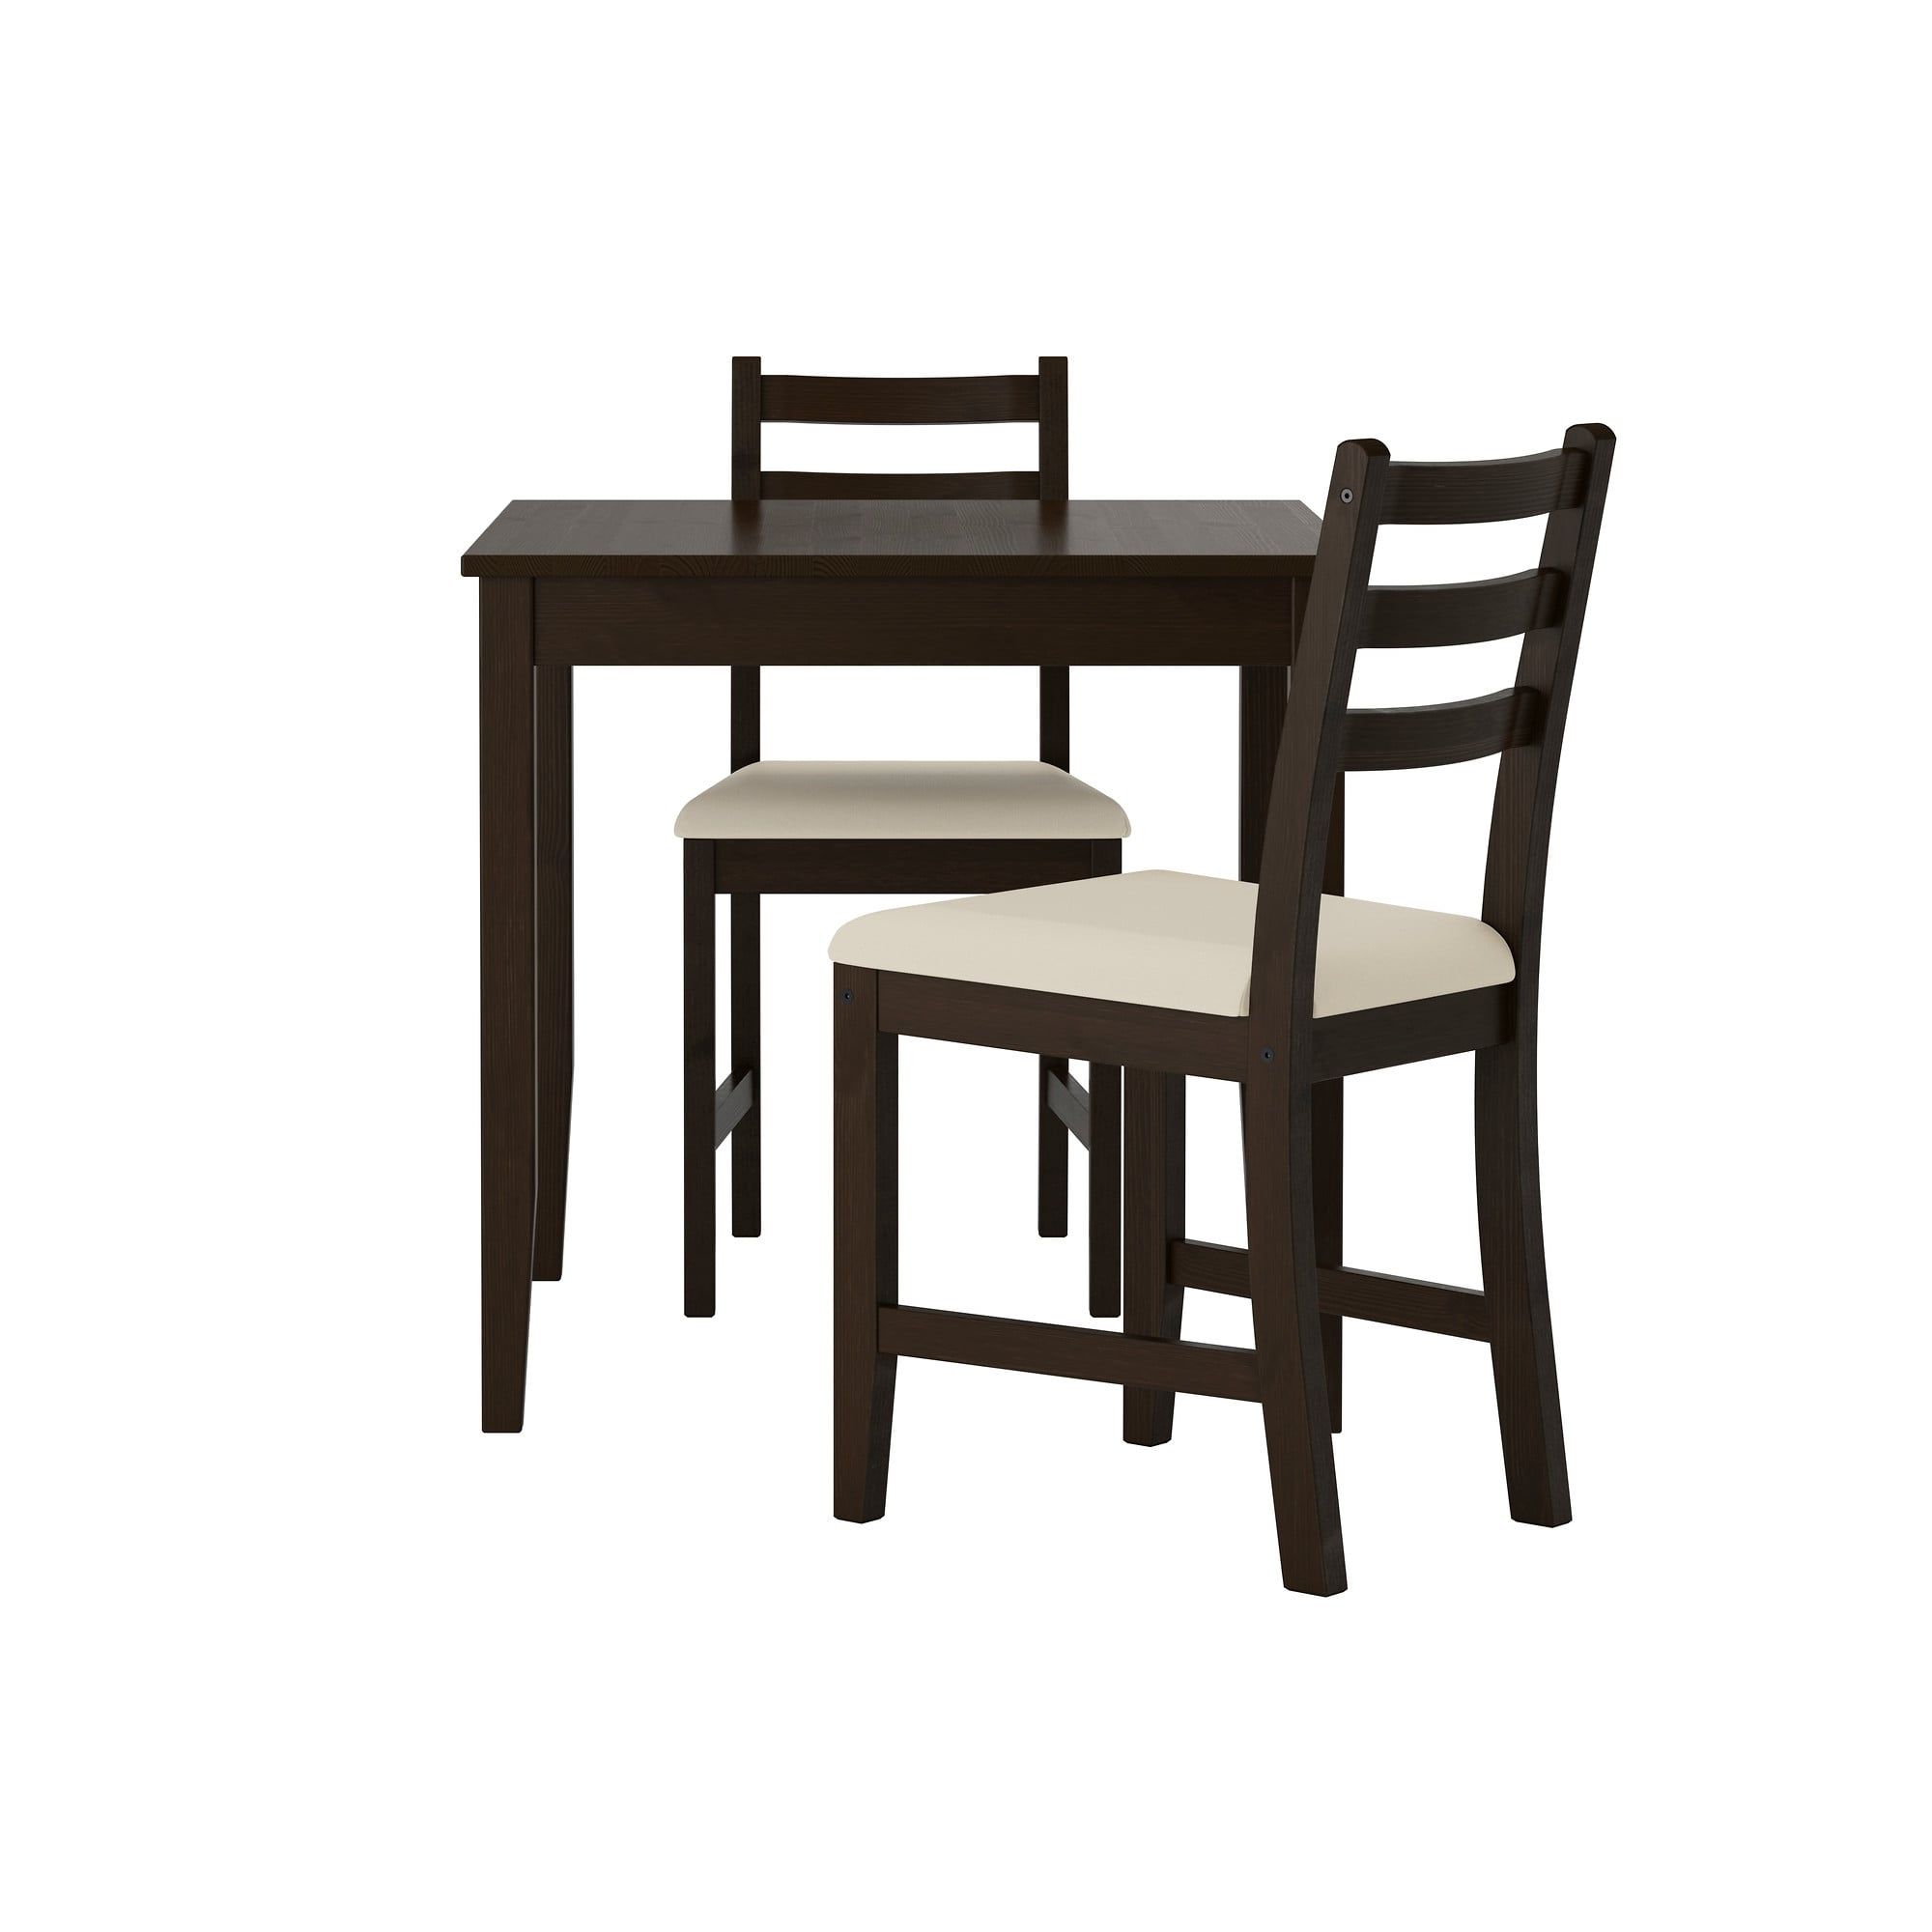 Lerhamn Table And 2 Chairs – Ikea Regarding Newest Two Seater Dining Tables And Chairs (View 7 of 25)